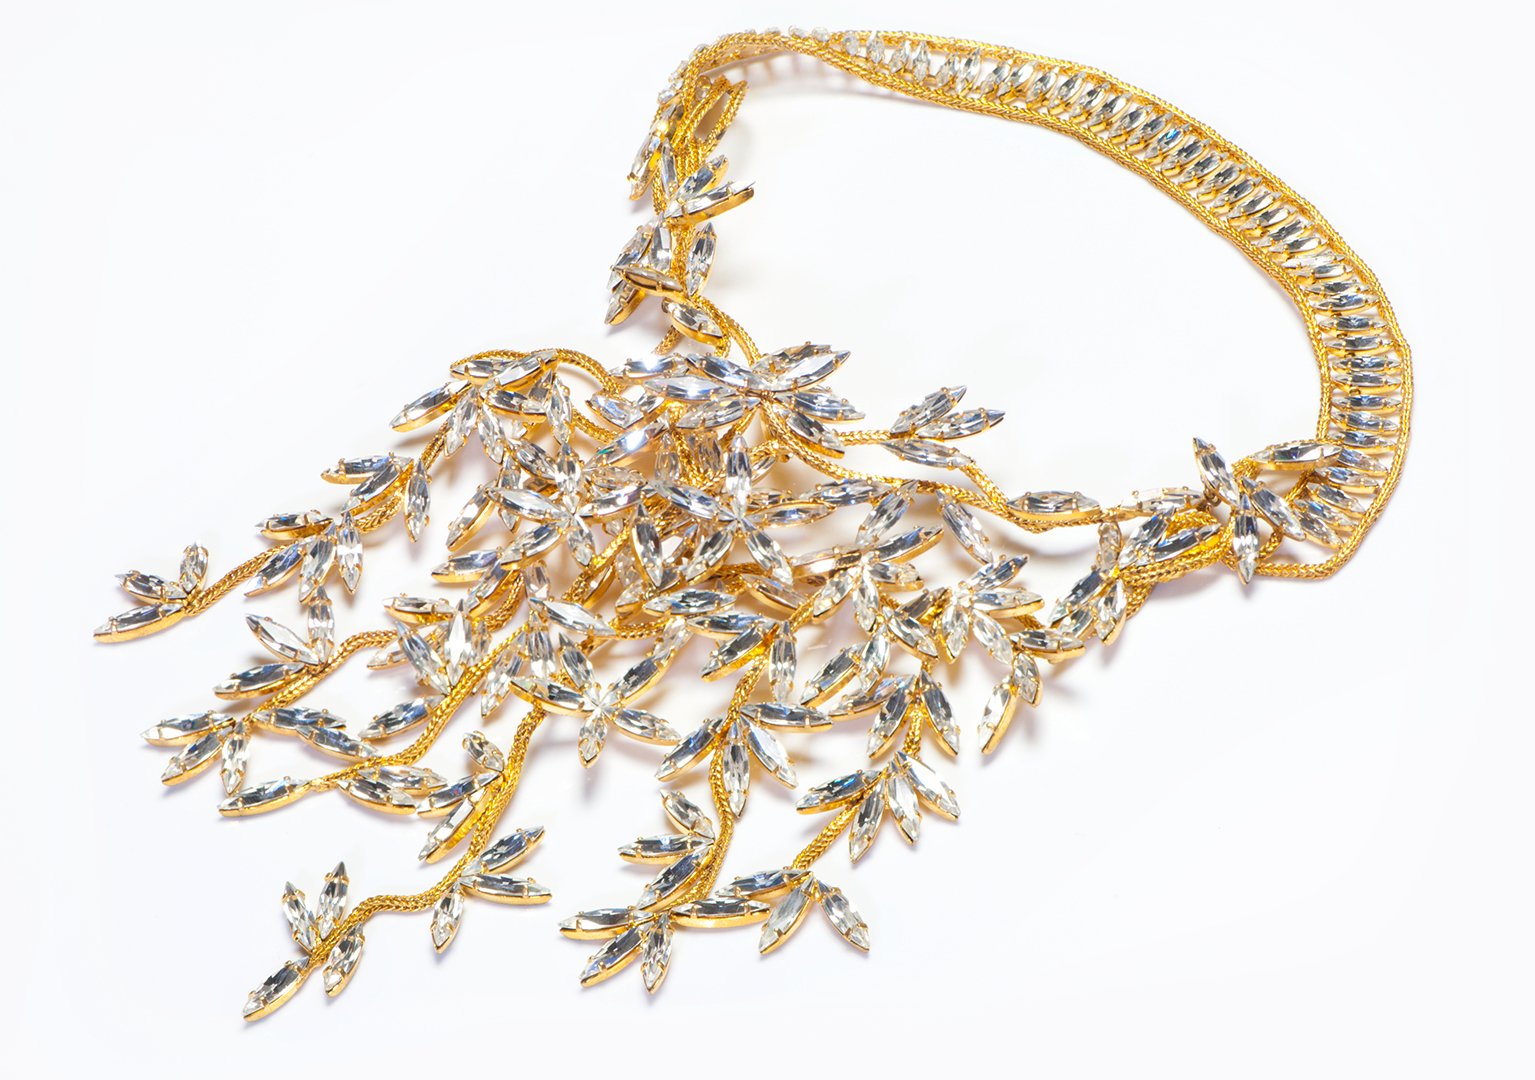 Christian Dior Couture 1950's Roger Jean Pierre Crystal Leaf Waterfall Necklace